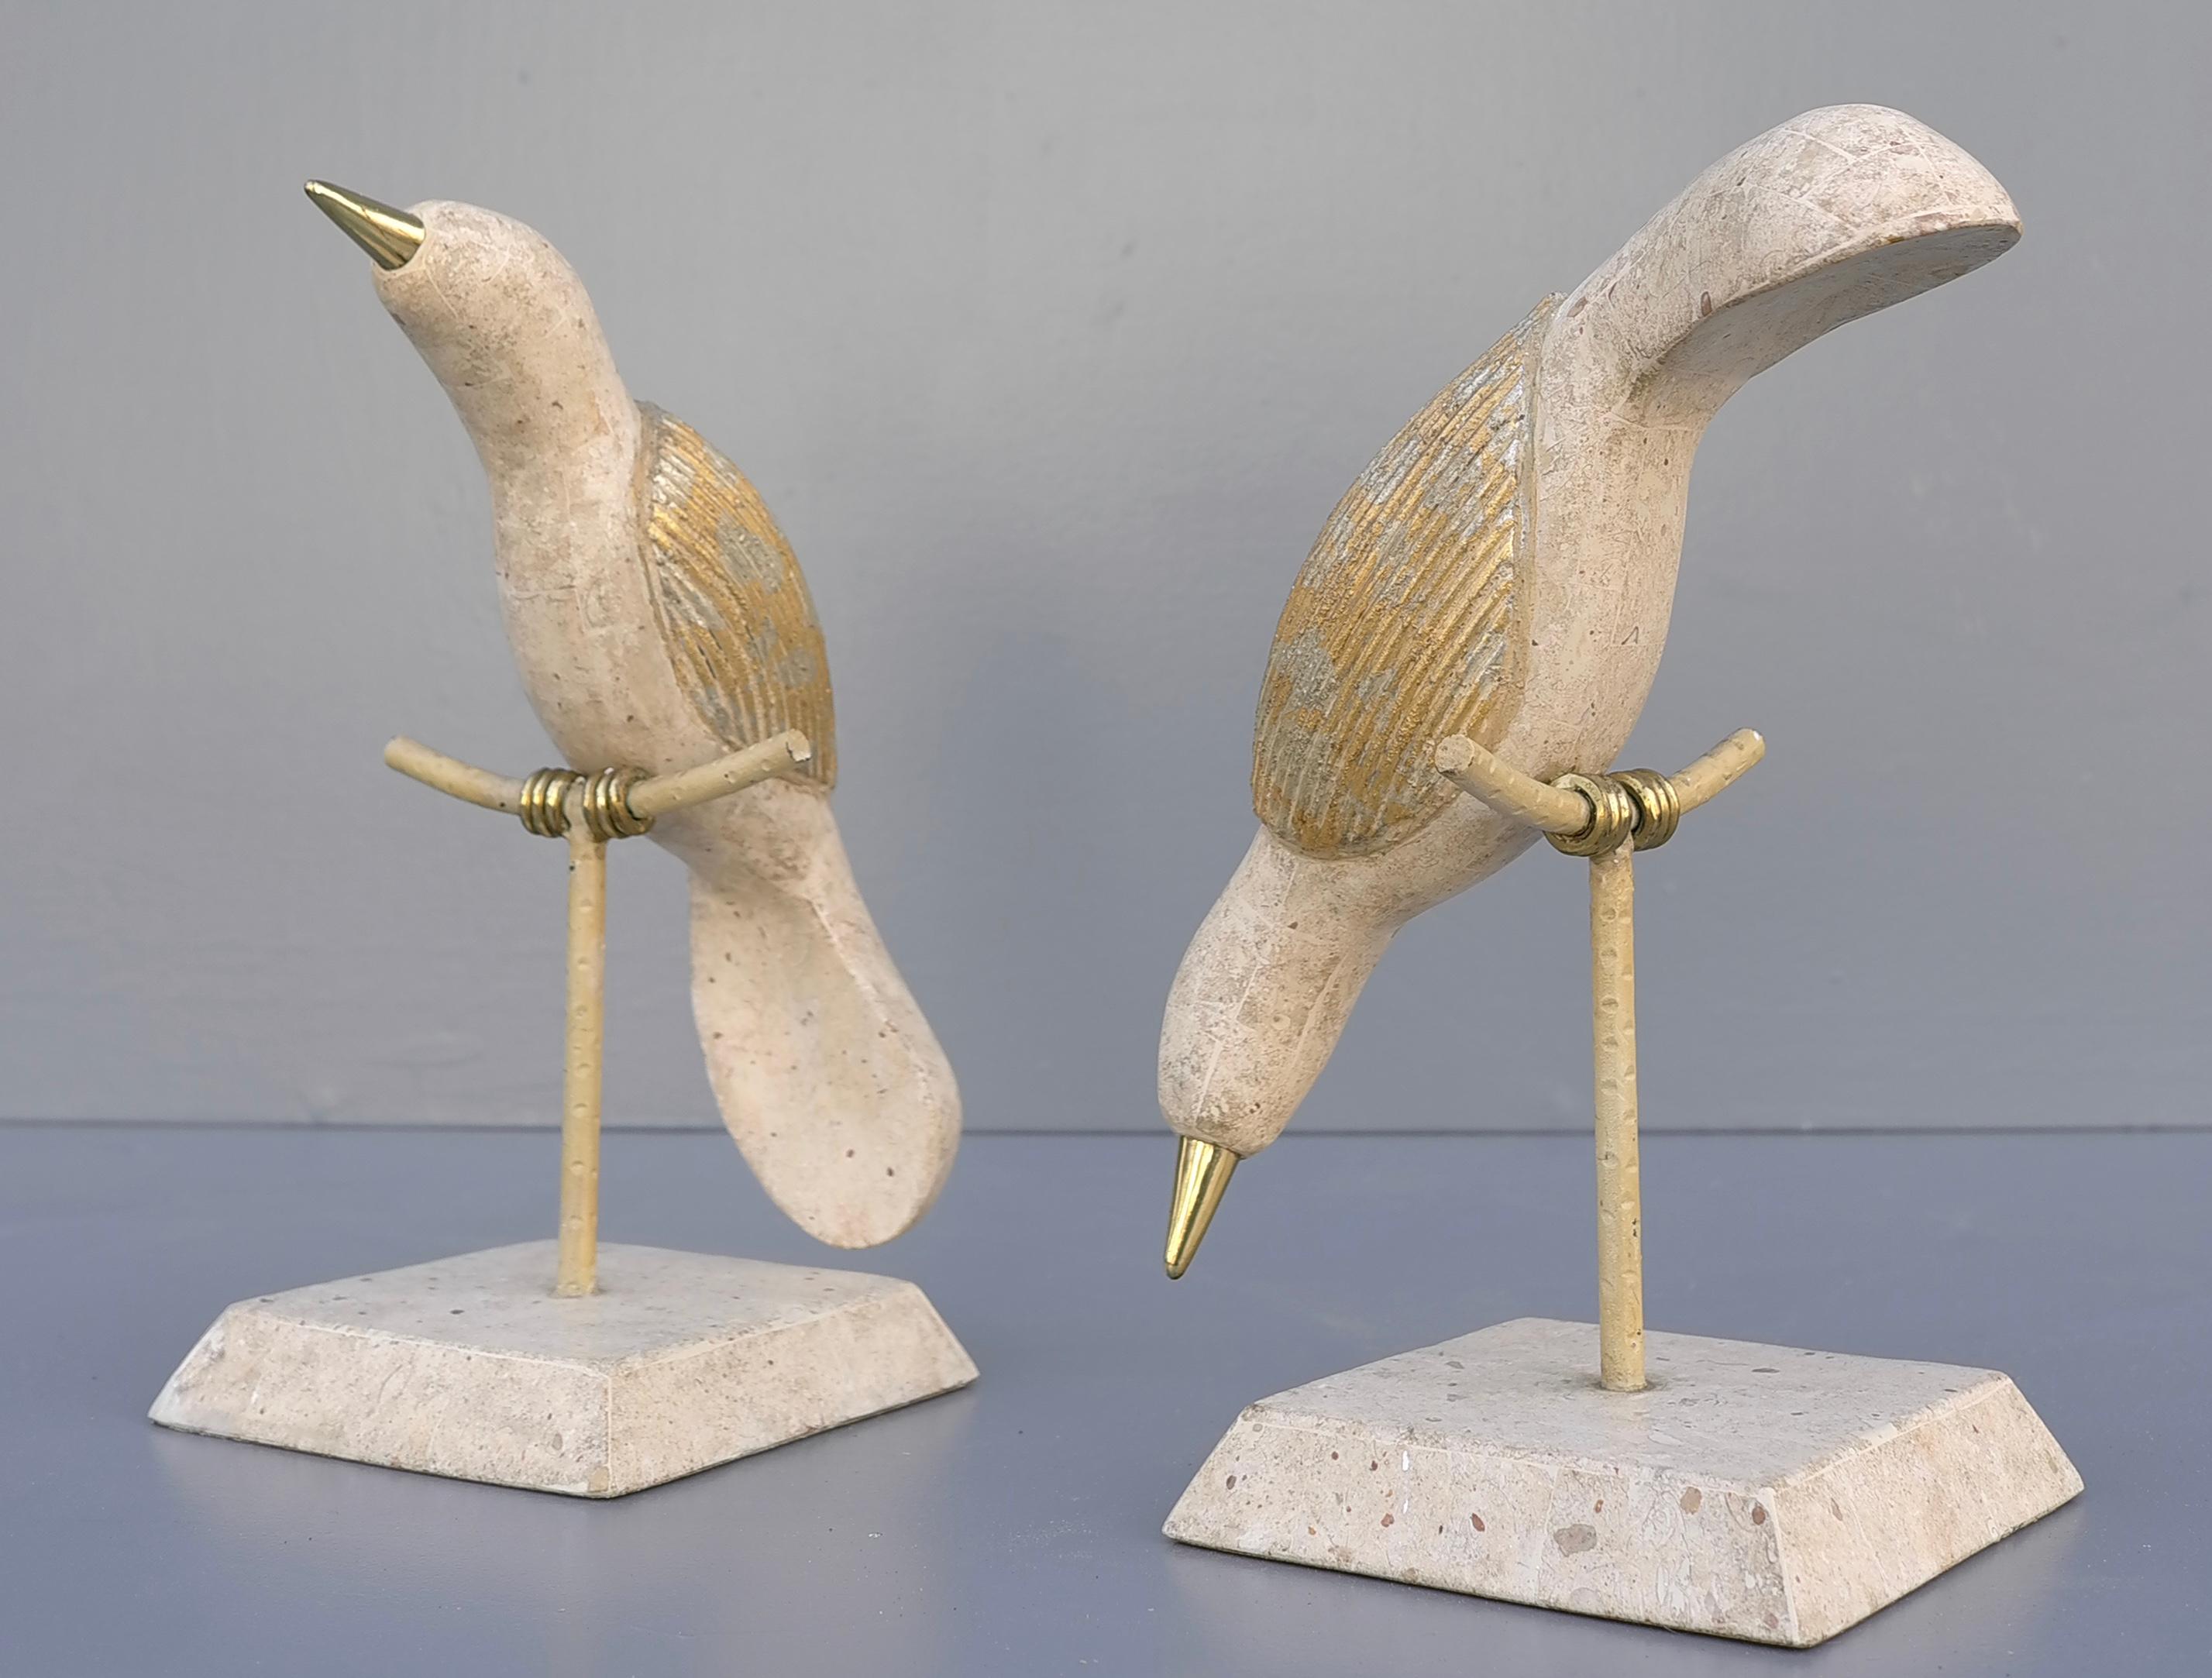 Tessellated Stone and Brass Birds Abstract Sculptures by Maitland Smith 1970's For Sale 3